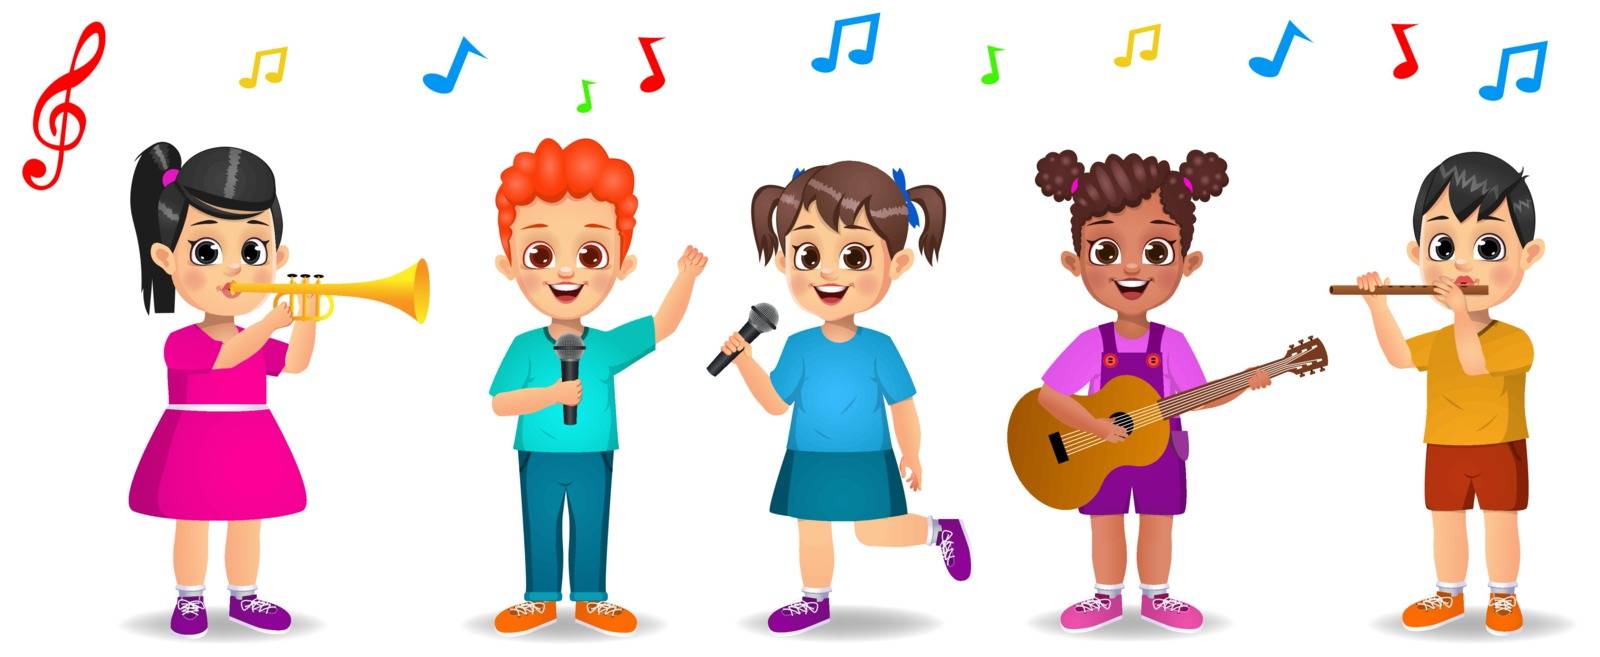 cute kids playing music together vector by vectordhunia